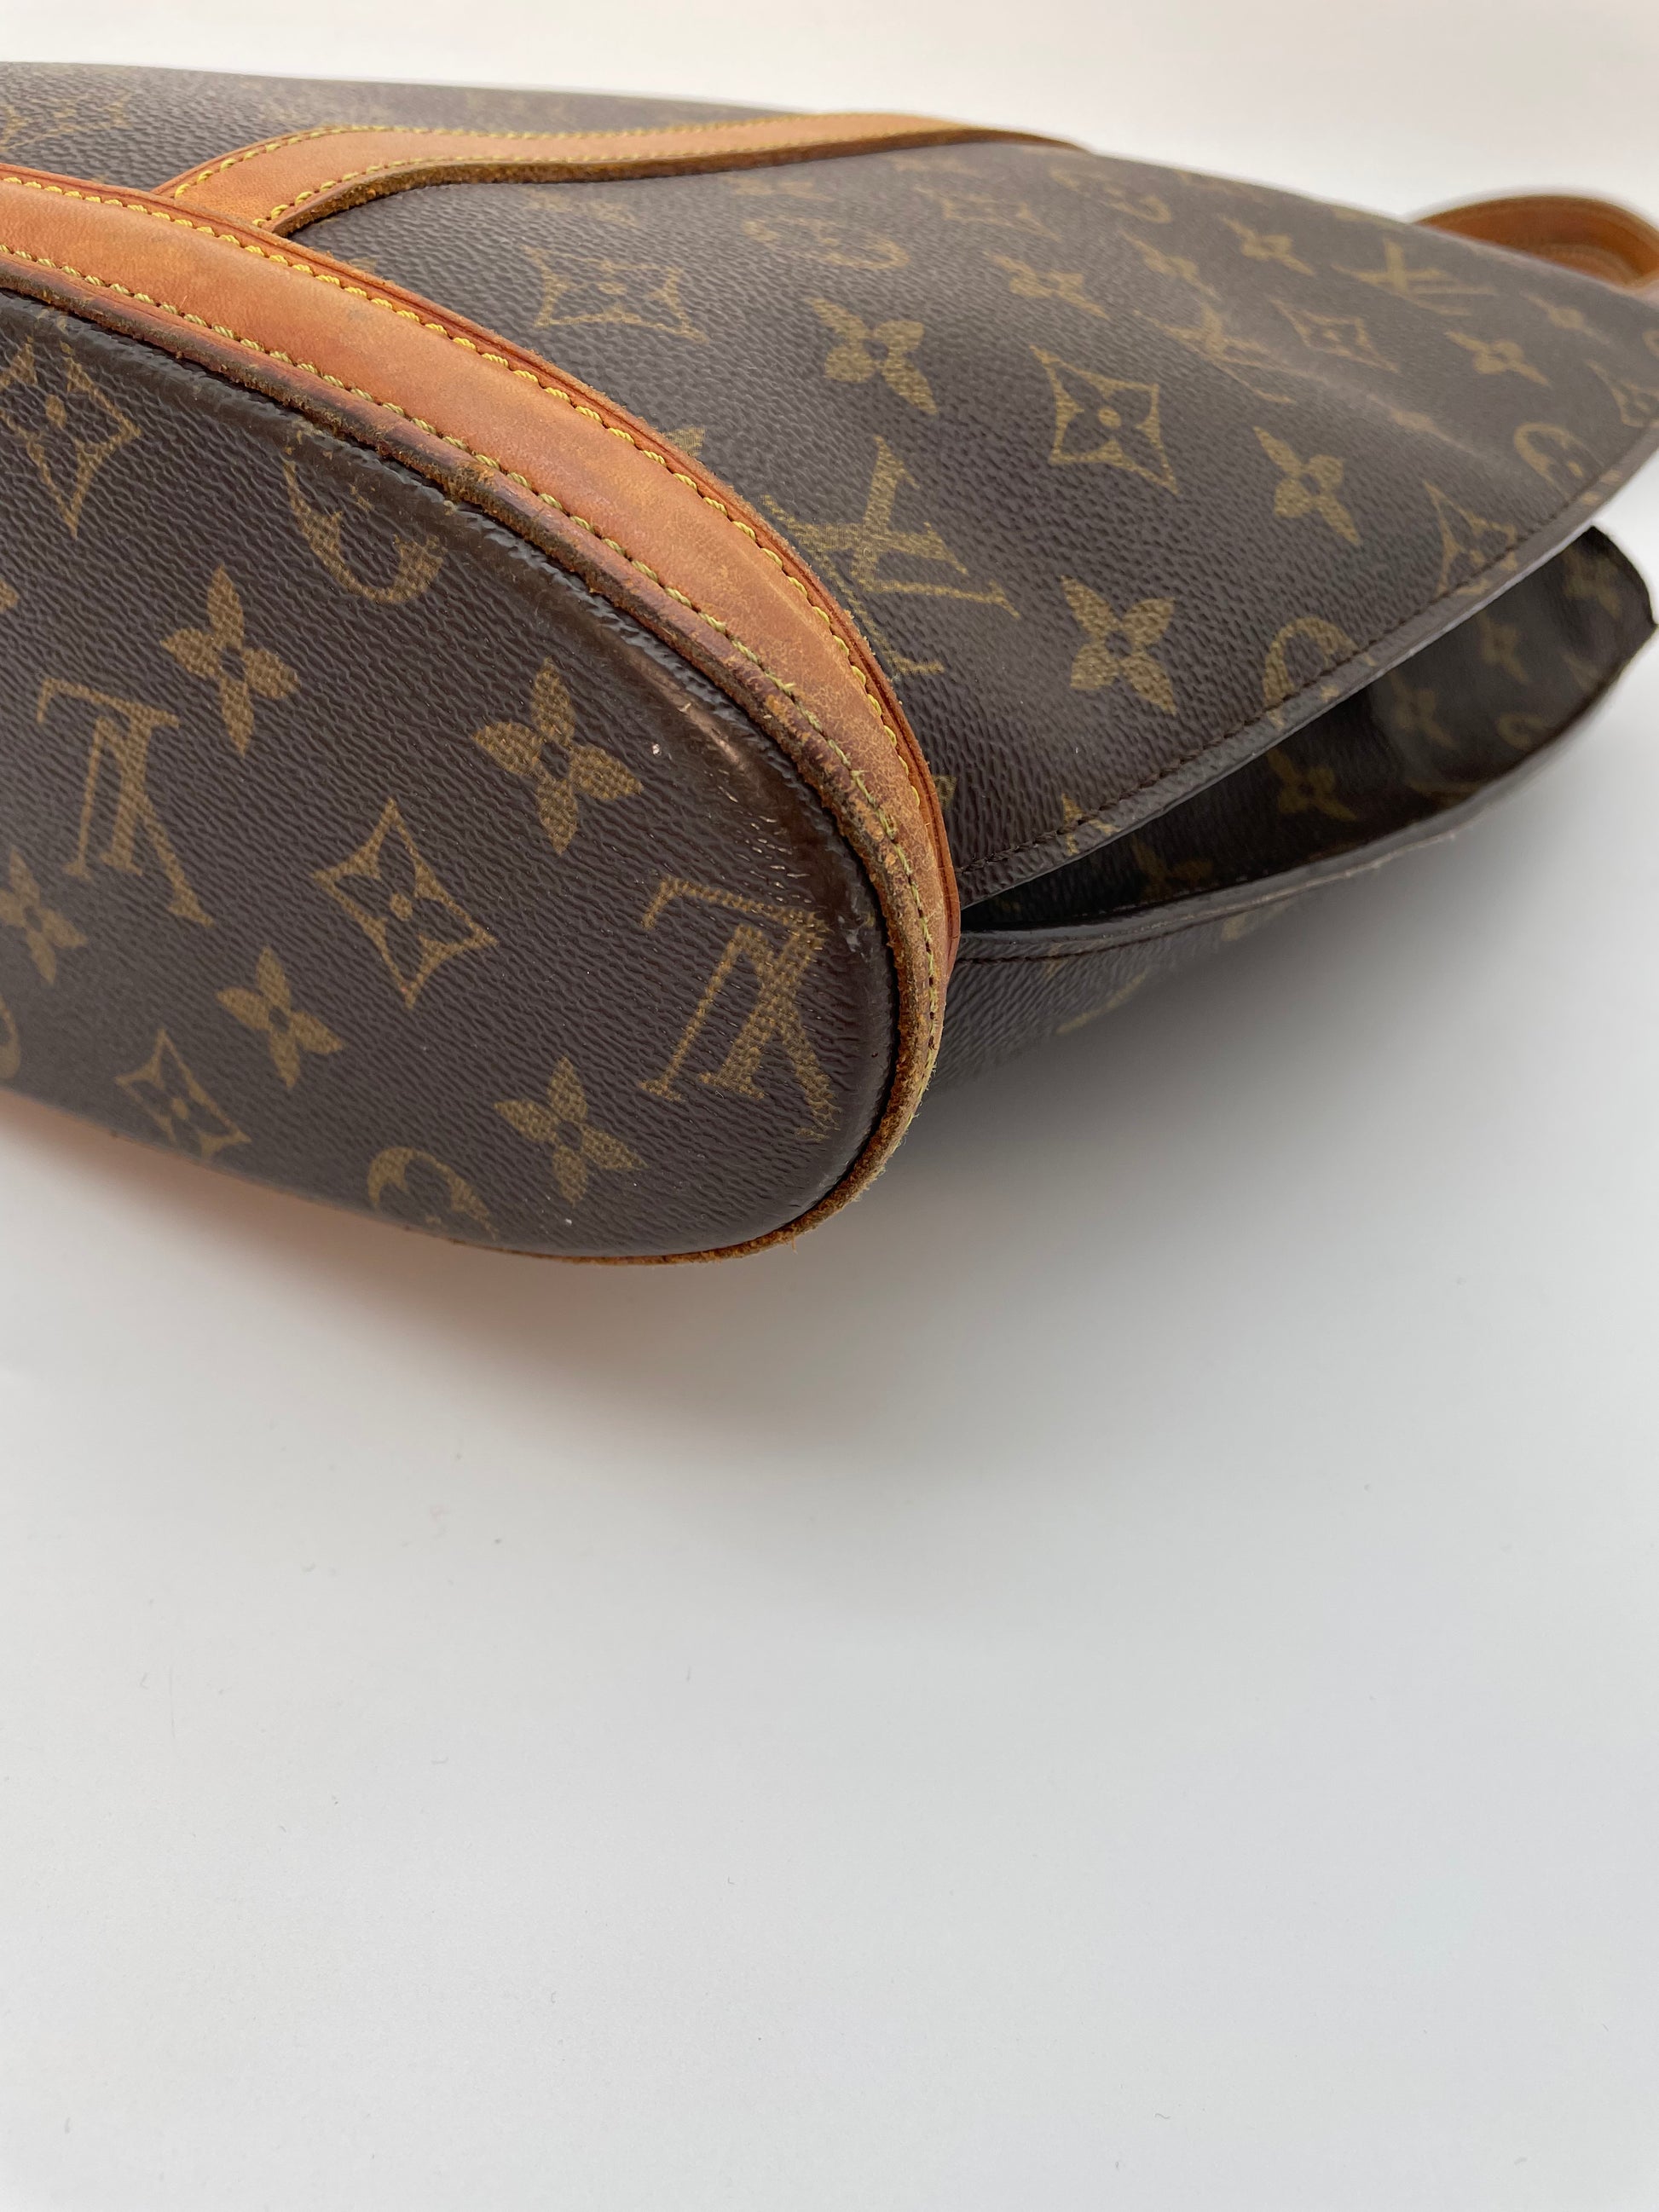 Designer Exchange Ltd - The LV Babylone is the perfect every day